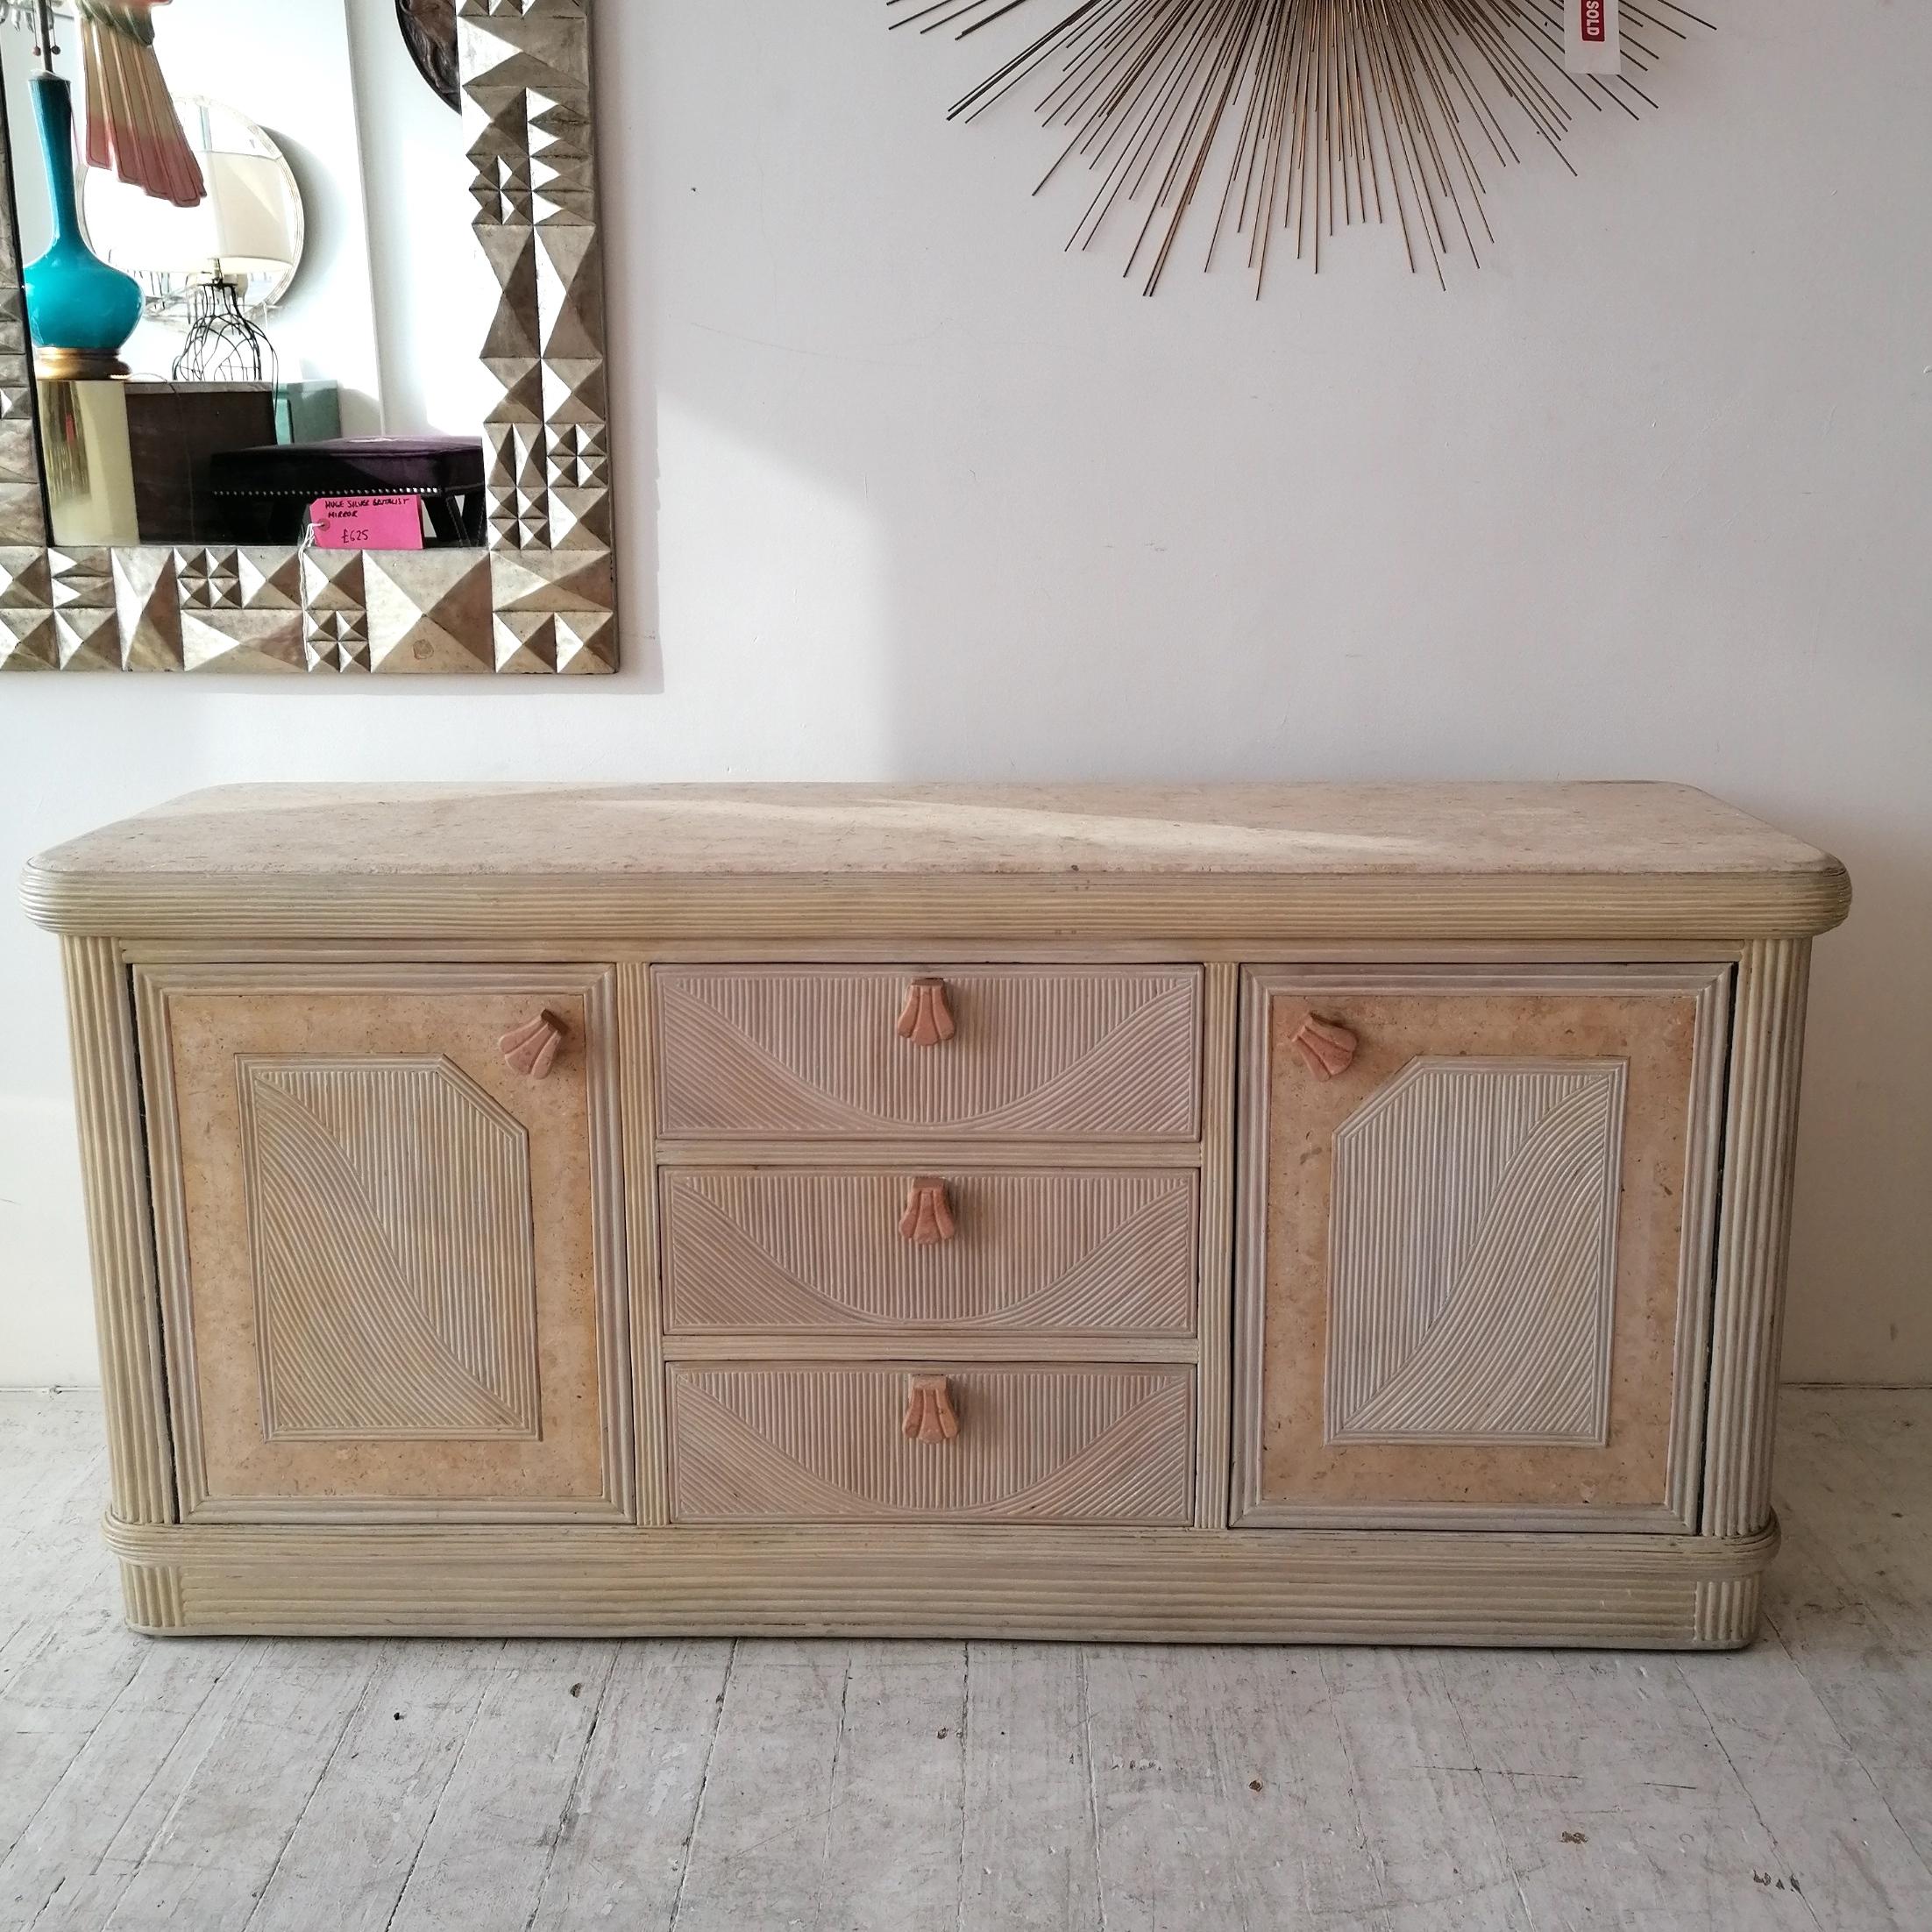 Vintage American pencil reed sideboard with pink scalloped marble handles & mactan stone top. Three central doors flanked by shelved storage cabinets.

Dimensions : width 167cm, depth 48cm, height 78.5cm.